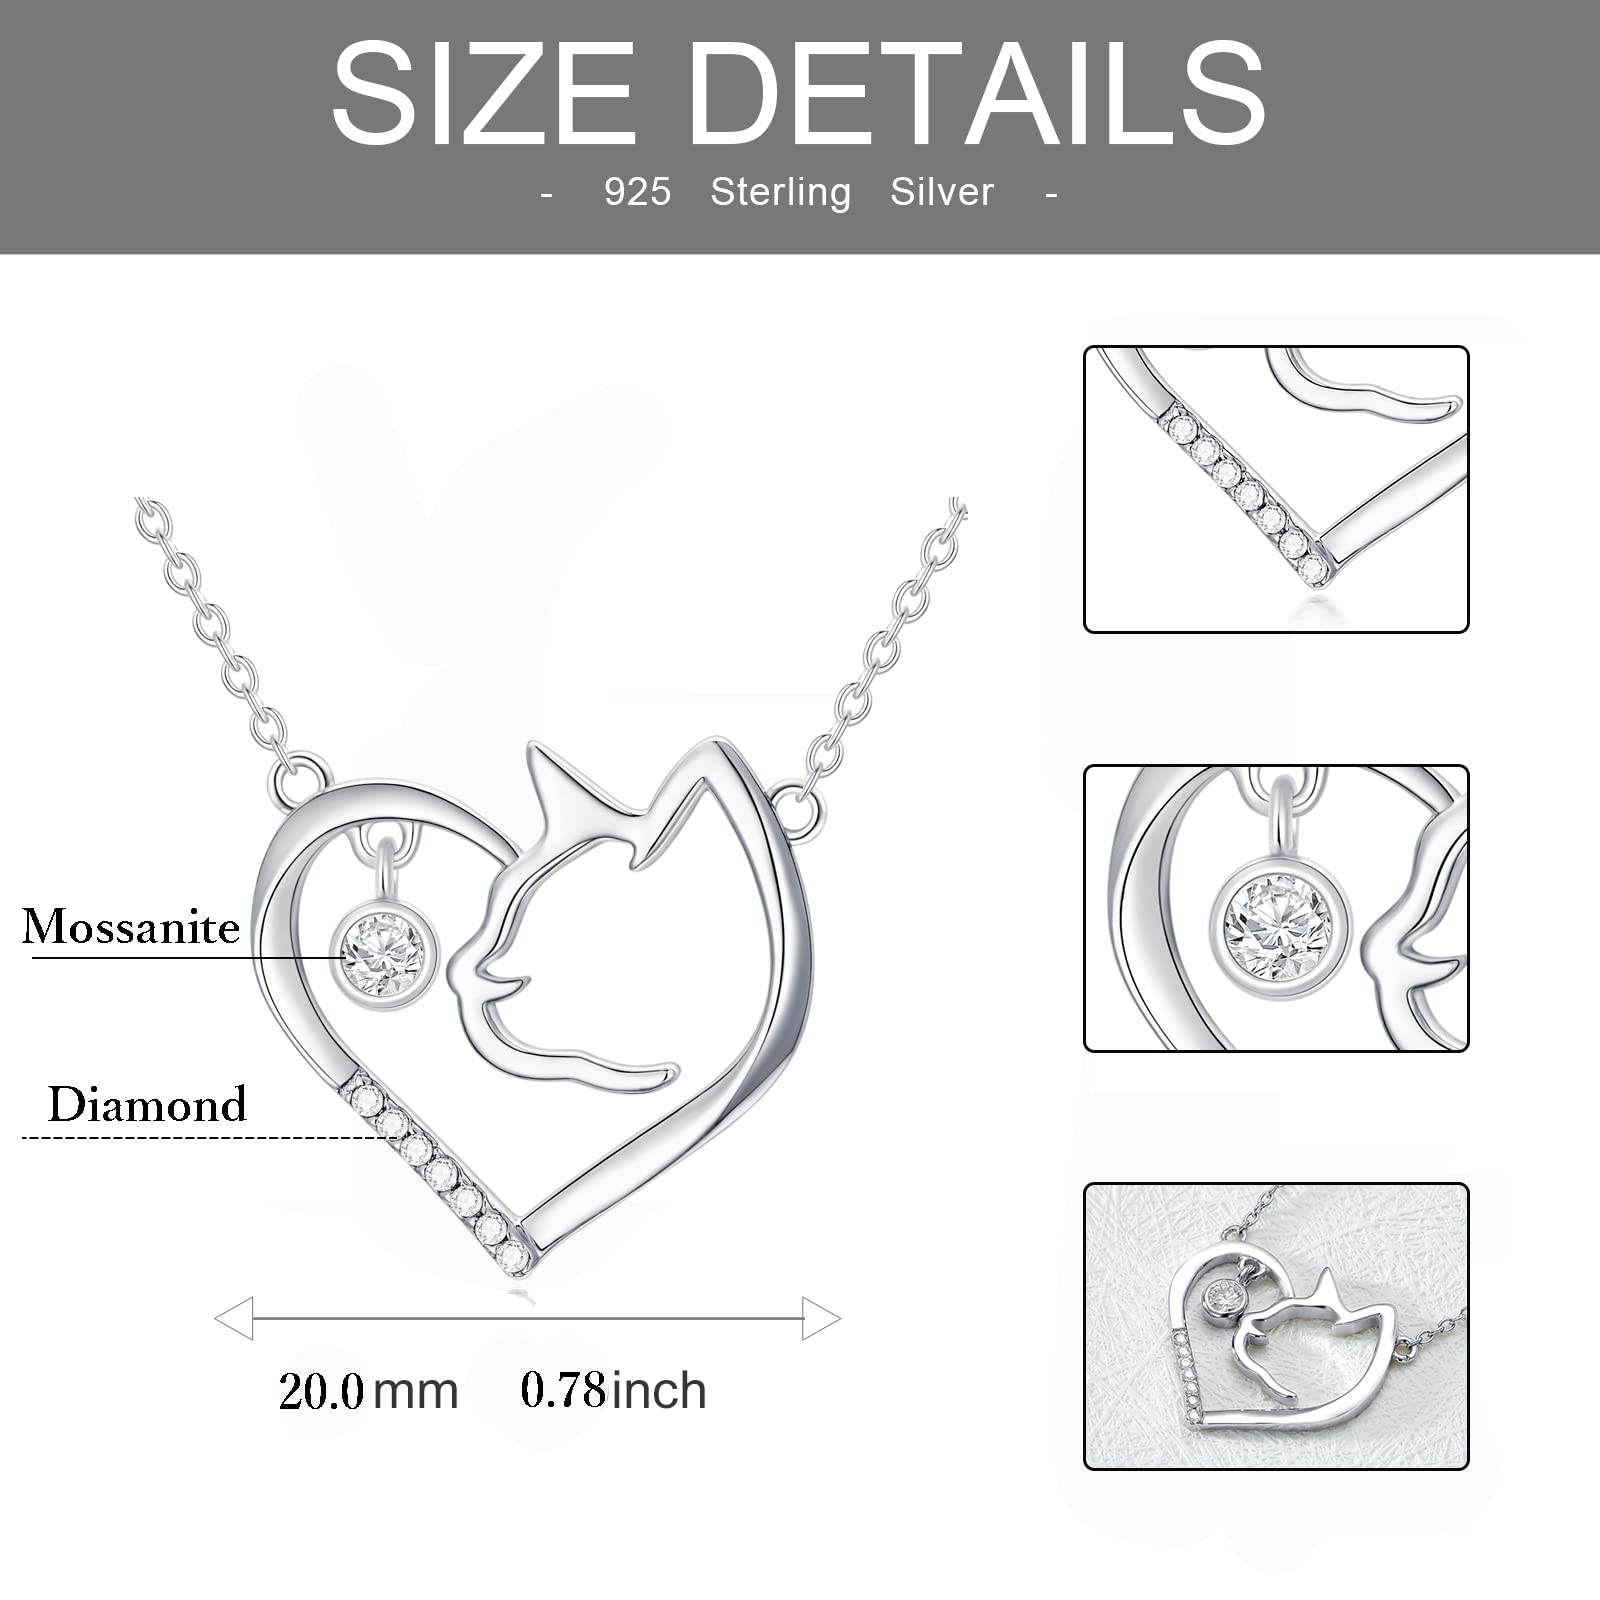 CTIEIP 1/10 cttw Sterling Silver Natural Diamond Necklaces Embellished with 0.5ct Mossanite, Hypoallergenic Necklaces, Anniversary Birthday Diamond Jewelry Gifts for Women